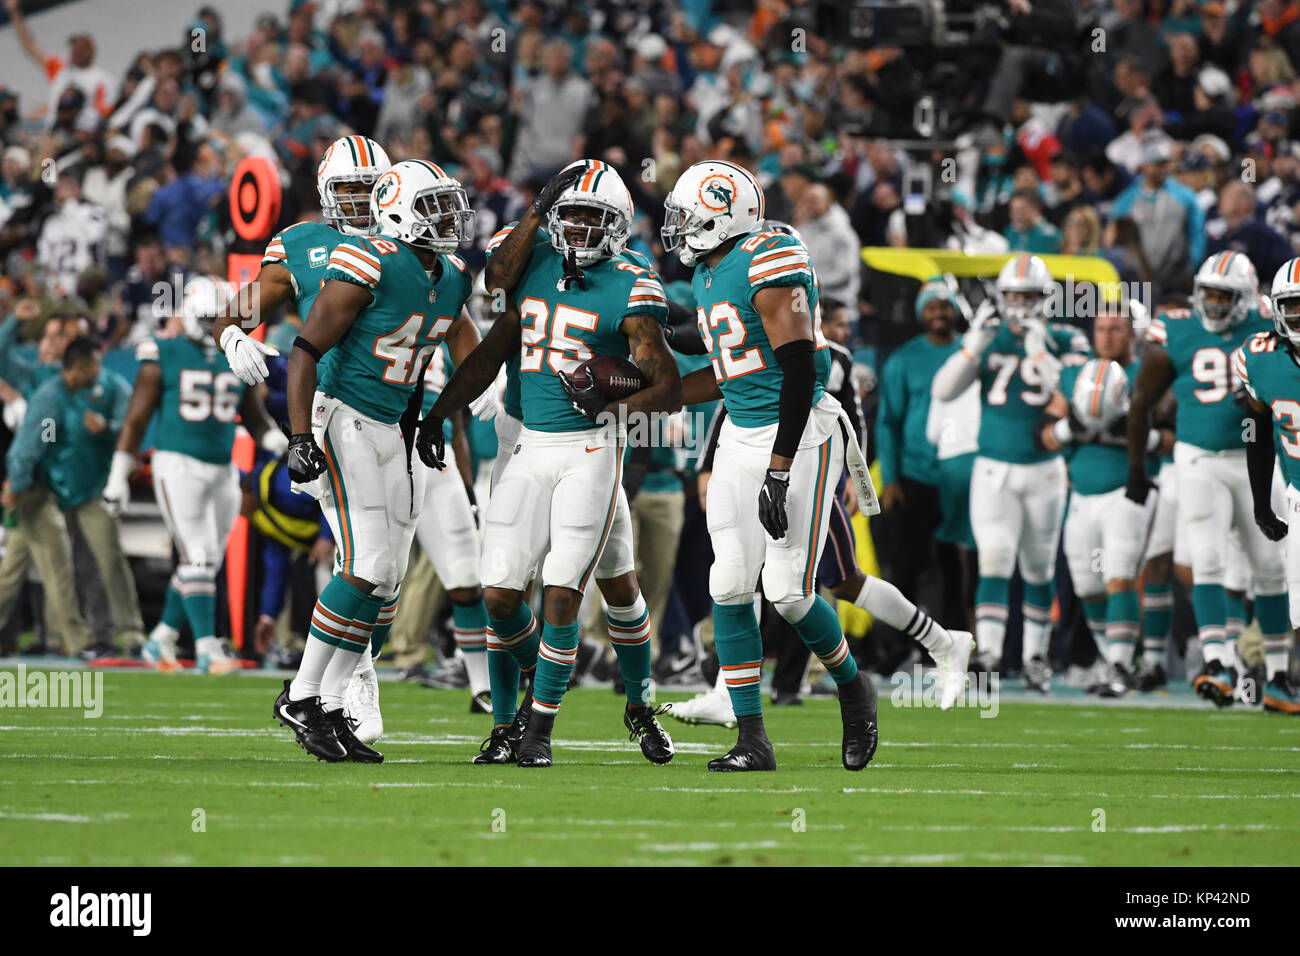 December 11, 2017: Xavien Howard #25 of Miami celebrates with Alterraun Verner #42 and T.J. McDonald #22 after intercepting a pass during the NFL football game between the Miami Dolphins and New England Patriots at Hard Rock Stadium in Miami Gardens FL. The Dolphins defeated the Patriots 27-20. Stock Photo